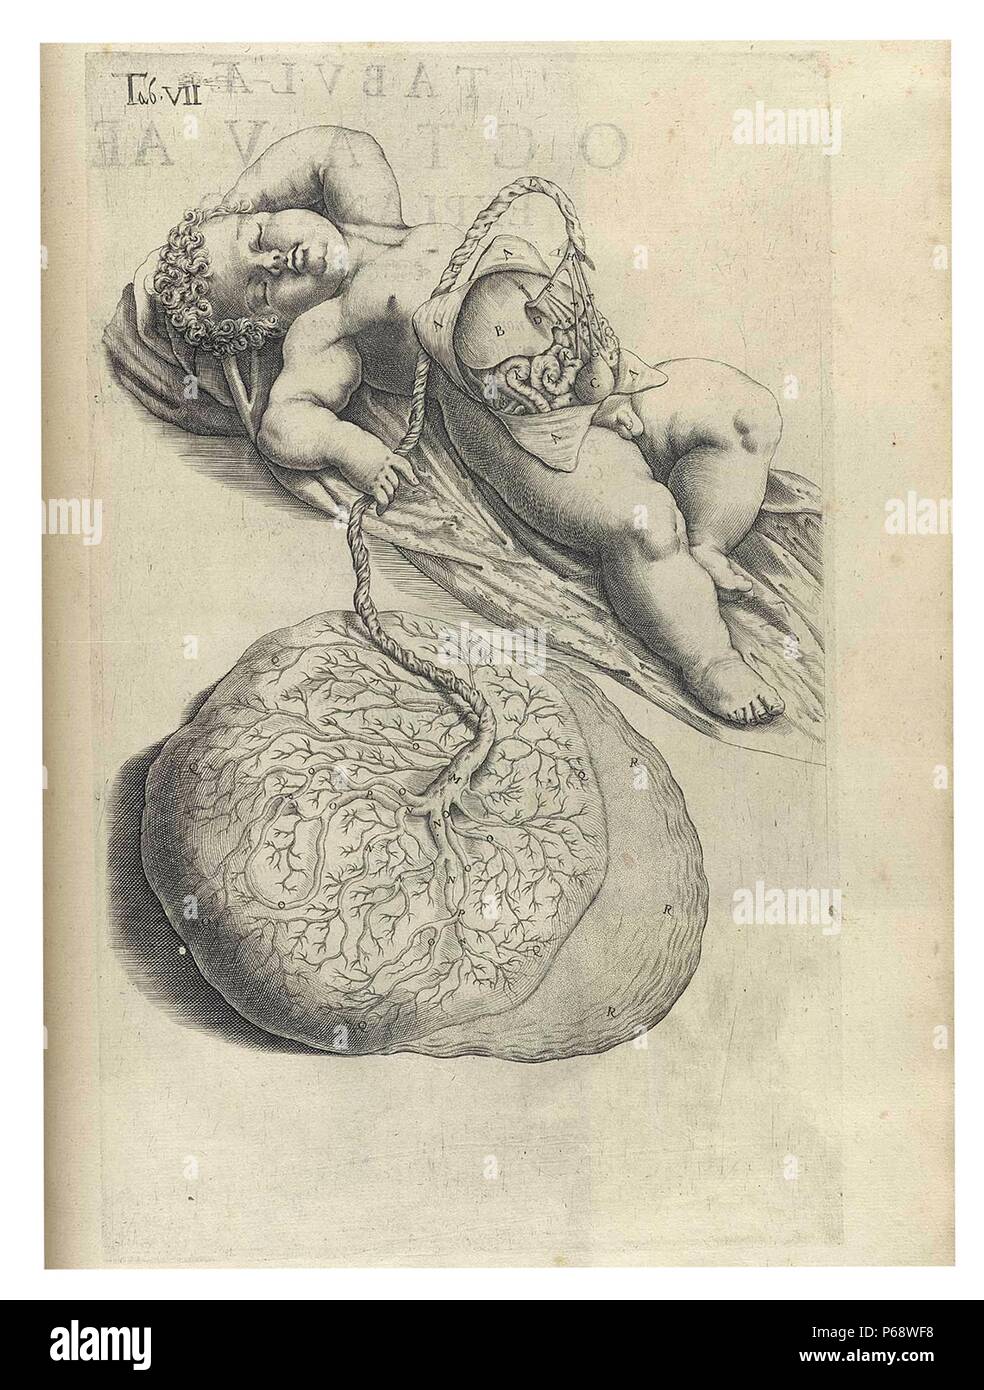 Anatomical drawing of a child's body by Adriaan van den Spiegel (1578-1625). Spiegel was a Flemish anatomist who was born in Brussels and practiced medicine in Padua. He is known as one of the greatest physicians associated with the city. Stock Photo